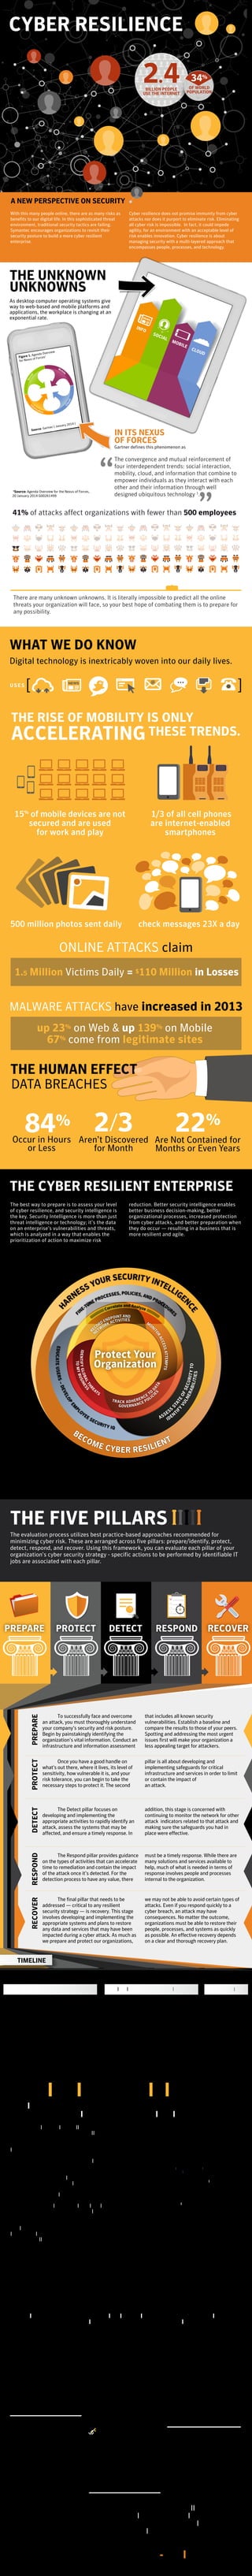 CYBER RESILIENCE 
A NEW PERSPECTIVE ON SECURITY 
With this many people online, there are as many risks as 
benefits to our digital life. In this sophisticated threat 
environment, traditional security tactics are failing. 
Symantec encourages organizations to revisit their 
security posture to build a more cyber resilient 
enterprise. 
2.4 BILLION PEOPLE 
USE THE INTERNET 
34% 
OF WORLD 
POPULATION 
Cyber resilience does not promise immunity from cyber 
attacks nor does it purport to eliminate risk. Eliminating 
all cyber risk is impossible. In fact, it could impede 
agility, for an environment with an acceptable level of 
risk enables innovation. Cyber resilience is about 
managing security with a multi-layered approach that 
encompasses people, processes, and technology. 
THE UNKNOWN 
UNKNOWNS 
As desktop computer operating systems give 
way to web-based and mobile platforms and 
applications, the workplace is changing at an 
exponential rate. 
IN ITS NEXUS 
OF FORCES 
Gartner defines this phenomenon as 
The convergence and mutual reinforcement of 
four interdependent trends: social interaction, 
mobility, cloud, and information that combine to 
empower individuals as they interact with each 
other and their information through well 
designed ubiquitous technology 1. 
“ 
Figure 1. Agenda Overview 
for Nexus of Forces1 
Source: Gartner ( January 2014 ) 
” 41% of attacks affect organizations with fewer than 500 employees 
1Source: Agenda Overview for the Nexus of Forces, 
20 January 2014 G00261499 
There are many unknown unknowns. It is literally impossible to predict all the online 
threats your organization will face, so your best hope of combating them is to prepare for 
any possibility. 
WHAT WE DO KNOW 
Digital technology is inextricably woven into our daily lives. 
USES[ ] 
THE RISE OF MOBILITY IS ONLY 
ACCELERATING THESE TRENDS. 
1/3 of all cell phones 
are internet-enabled 
smartphones 
15% of mobile devices are not 
secured and are used 
for work and play 
500 million photos sent daily check messages 23X a day 
ONLINE ATTACKS claim 
1.5 Million Victims Daily = $110 Million in Losses 
MALWARE ATTACKS have increased in 2013 
up 23% on Web & up 139% on Mobile 
67% come from legitimate sites 
THE HUMAN EFFECT 
DATA BREACHES 
2/3 
84% 
Are Not Contained for 
Months or Even Years 
Occur in Hours 
or Less 
Aren’t Discovered 
for Month 
THE CYBER RESILIENT ENTERPRISE 
The best way to prepare is to assess your level 
of cyber resilience, and security intelligence is 
the key. Security Intelligence is more than just 
threat intelligence or technology; it’s the data 
on an enterprise’s vulnerabilities and threats, 
which is analyzed in a way that enables the 
prioritization of action to maximize risk 
reduction. Better security intelligence enables 
better business decision-making, better 
organizational processes, increased protection 
from cyber attacks, and better preparation when 
they do occur — resulting in a business that is 
more resilient and agile. 
HARNESS YOUR SECURITY INTELLIGENCE 
FINE-TUNE PROCESSES, POLICIES, AND PROCEDURES 
<<<<<<<<<<<<<<<<<<<< Correlate and Analyze >>>>>>>>>>>>>>>>>> 
RECORD ENDPOINT AND 
MONITOR ACCESS ATTEMPTS 
NETWORK ACTIVITIES 
EDUCATE USERS – DEVELOP EMPLOYEE SECURITY IQ 
ASSESS STATE OF SECURITY TO 
Protect Your 
Organization 
TRACK ADHERENCE TO DATA 
IDENTIFY GLOBAL THREATS 
GOVERNANCE POLICIES 
TO MY BUSINESS 
IDENTIFY VULNERABILITIES 
BECOME CYBER RESILIENT 
THE FIVE PILLARS 
The evaluation process utilizes best practice-based approaches recommended for 
minimizing cyber risk. These are arranged across five pillars: prepare/identify, protect, 
detect, respond, and recover. Using this framework, you can evaluate each pillar of your 
organization’s cyber security strategy - specific actions to be performed by identifiable IT 
jobs are associated with each pillar. 
PREPARE PROTECT DETECT RESPOND RECOVER 
an attack, you must thoroughly understand 
your company’s security and risk posture. 
Begin by painstakingly identifying the 
organization’s vital information. Conduct an 
infrastructure and information assessment 
what's out there, where it lives, its level of 
sensitivity, how vulnerable it is, and your 
risk tolerance, you can begin to take the 
necessary steps to protect it. The second 
developing and implementing the 
appropriate activities to rapidly identify an 
attack, assess the systems that may be 
affected, and ensure a timely response. In 
on the types of activities that can accelerate 
time to remediation and contain the impact 
of the attack once it’s detected. For the 
detection process to have any value, there 
addressed — critical to any resilient 
security strategy — is recovery. This stage 
involves developing and implementing the 
appropriate systems and plans to restore 
any data and services that may have been 
impacted during a cyber attack. As much as 
we prepare and protect our organizations, 
RECOVER RESPOND DETECT PROTECT PREPARE 
TIMELINE 
To successfully face and overcome 
that includes all known security 
vulnerabilities. Establish a baseline and 
compare the results to those of your peers. 
Spotting and addressing the most urgent 
issues first will make your organization a 
less appealing target for attackers. 
Once you have a good handle on 
pillar is all about developing and 
implementing safeguards for critical 
infrastructure and services in order to limit 
or contain the impact of 
an attack. 
The Detect pillar focuses on 
addition, this stage is concerned with 
continuing to monitor the network for other 
attack indicators related to that attack and 
making sure the safeguards you had in 
place were effective. 
The Respond pillar provides guidance 
must be a timely response. While there are 
many solutions and services available to 
help, much of what is needed in terms of 
response involves people and processes 
internal to the organization. 
The final pillar that needs to be 
we may not be able to avoid certain types of 
attacks. Even if you respond quickly to a 
cyber breach, an attack may have 
consequences. No matter the outcome, 
organizations must be able to restore their 
people, processes, and systems as quickly 
as possible. An effective recovery depends 
on a clear and thorough recovery plan. 
PREPARE PROTECT DETECT RESPOND RECOVER 
Prepare for Attacks Implement Response Plan Refine Plan 
ATTACKER INGRESS 
ATTACKER DETECTED 
SYSTEMS SECURED 
NORMAL RESPONSE PLAN 
ACHIEVING RESILIENCE 
THE IMPACTS OF A MAJOR CYBER ATTACK 
CAN BE DEVASTATING TO ANY ORGANIZATION. 
Unfortunately, no silver bullet exists to 
prevent attacks, and breaches will occur in 
spite of an organization’s best efforts at 
preparation and protection. Many customers 
lack the sophistication and expertise they 
need to address these new, more advanced 
threats. To minimize the potential 
devastation of a cyber attack, you must 
change the way you think about security. 
Think in terms of not eliminating cyber risk 
but of creating cyber resilience. 
To create cyber resilience, organizations 
must begin by changing the conversation 
about cyber risk. It’s crucial to align IT and 
the business and encourage regular, 
productive discussions to identify the 
benefits and risks associated with a cyber 
resilient strategy. Find and use a common 
language. IT security must accept that the 
business will be tempted to take risks in 
order to succeed and must empower the 
business to make informed decisions on how 
they manage cyber risk. 
22% 
Figure 2 
The Targeted-Attack 
Hierarchy of Needs 
An Integrated Portfolio 
that Enables Orchestration 
A Focus on the Fundamentals 
A Dedication to Recruiting and Retaining Staff 
An Actual Security Strategy 
Source: Forrester Research, Inc 
Detection 
and response 
Prevention 
SYMANTEC IS UNIQUELY QUALIFIED TO DELIVER 
ON THE PROMISE OF BEING THE VENDOR TO HELP ORGANIZATIONS 
ACHIEVE CYBER RESILIENCE. 
WE HAVE: 
SOLUTIONS: 
Our extensive security portfolio 
helps you create a layered 
approach to security so you can 
identify internal threats, stay 
informed of the external security 
issues that threaten your 
organization, and take action 
against them quickly and 
comprehensively. Our solutions 
help organizations discover, 
track, and protect data and 
users. And our managed security 
service offerings provide 
monitoring and big data analysis. 
SECURITY INTELLIGENCE 
IS THE KEY: 
We operate the largest civilian 
cyber intelligence threat network 
anywhere, giving us unrivaled 
insight to what attackers will try 
next. 
Our Symantec Global Intelligence 
Network maintains worldwide 
visibility into the threat 
landscape via 65 million attack 
sensors that constantly monitor 
networks and vulnerabilities. The 
network gathers data from one of 
the most extensive antifraud 
communities of enterprises and 
security vendors. It checks more 
than 1.4 billion web requests and 
8 billion emails a day. We track 
3.7 trillion “threat indicators” 
annually across the Internet and 
continuously collect new 
telemetry from hundreds of 
millions of mobile devices, 
endpoints, and servers around 
the globe, coverage that’s 
unrivaled in the industry. 
SCALE, EXPERTISE, 
AND INFRASTRUCTURE: 
We have the scale and global 
security architecture. Thousands 
of employees including 1000 
security analysts and researchers 
worldwide based in 50 different 
countries, 5 PCI-certified 
Security Operations Centers, and 
secure datacenters including a 
4-tier military grade datacenter 
for our authentication solutions. 
We have the scale to protect 
information wherever it’s stored 
or accessed. And we have the 
capacity to respond to attacks 
immediately. 
Contact your Symantec account representative or reseller partner 
today to discuss how you can start building cyber resilience into your 
security strategy. Get more information about cyber resilience and 
stay informed at the Symantec cyber resilience microsite. 
go.symantec.com/cyber-resilience 
